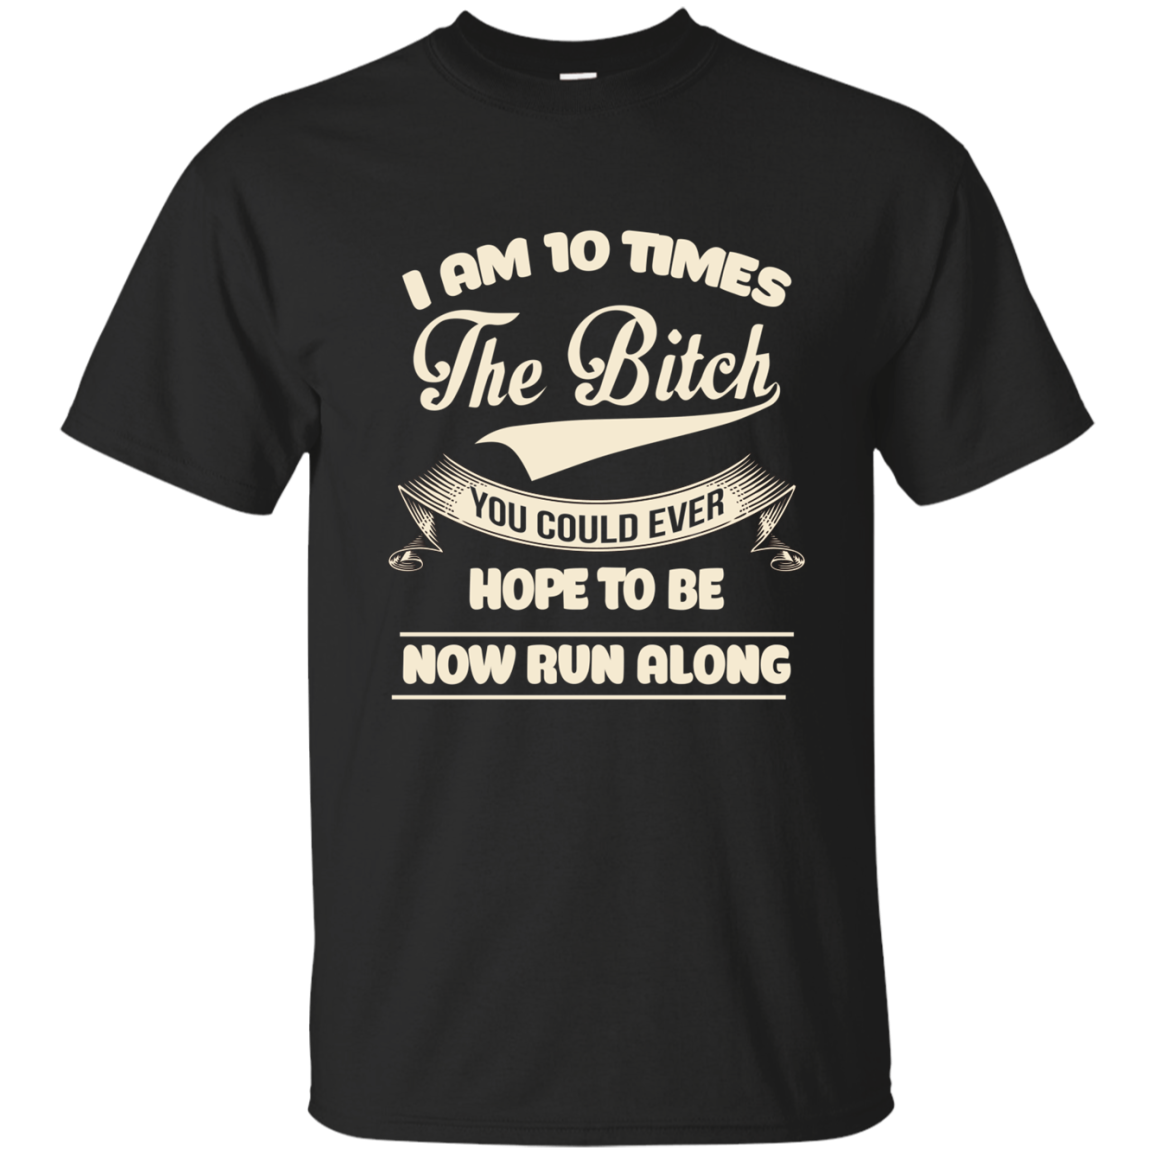 I am 10 time the bitch you could ever hope to be now run along shirt, hoodie, tank